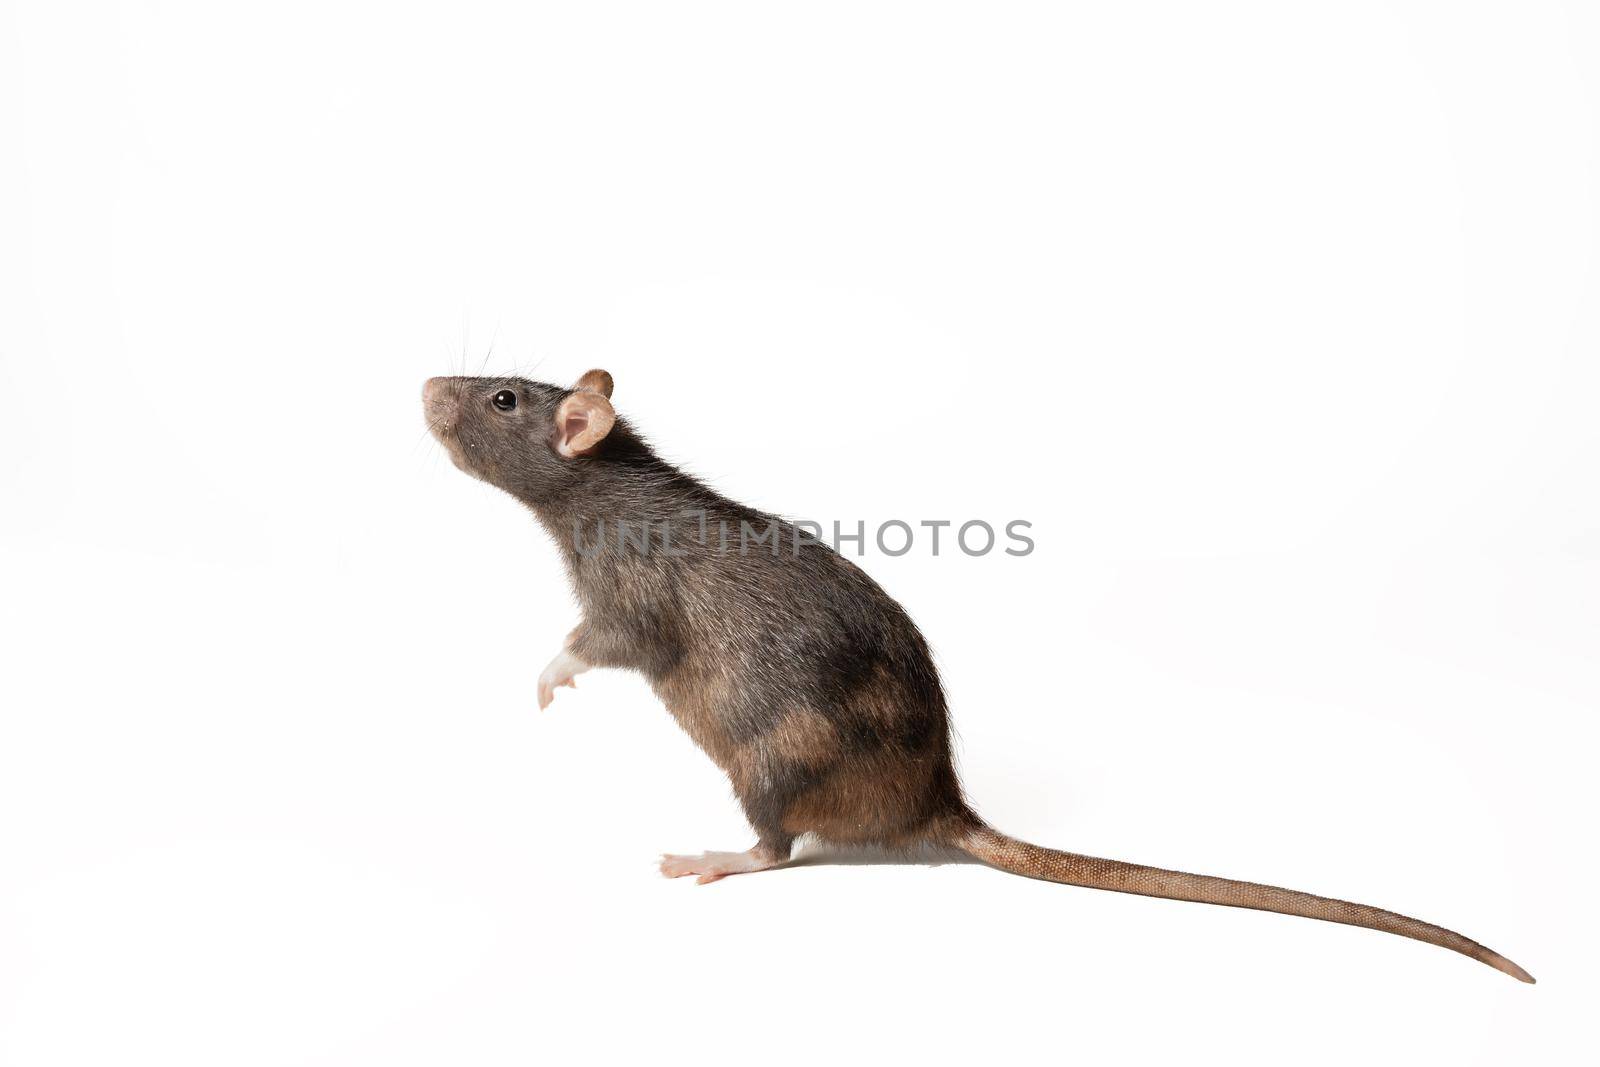 black rat standing on two legs, in profile isolated on white background. rodent animal of small size. animal concept. by CatPhotography